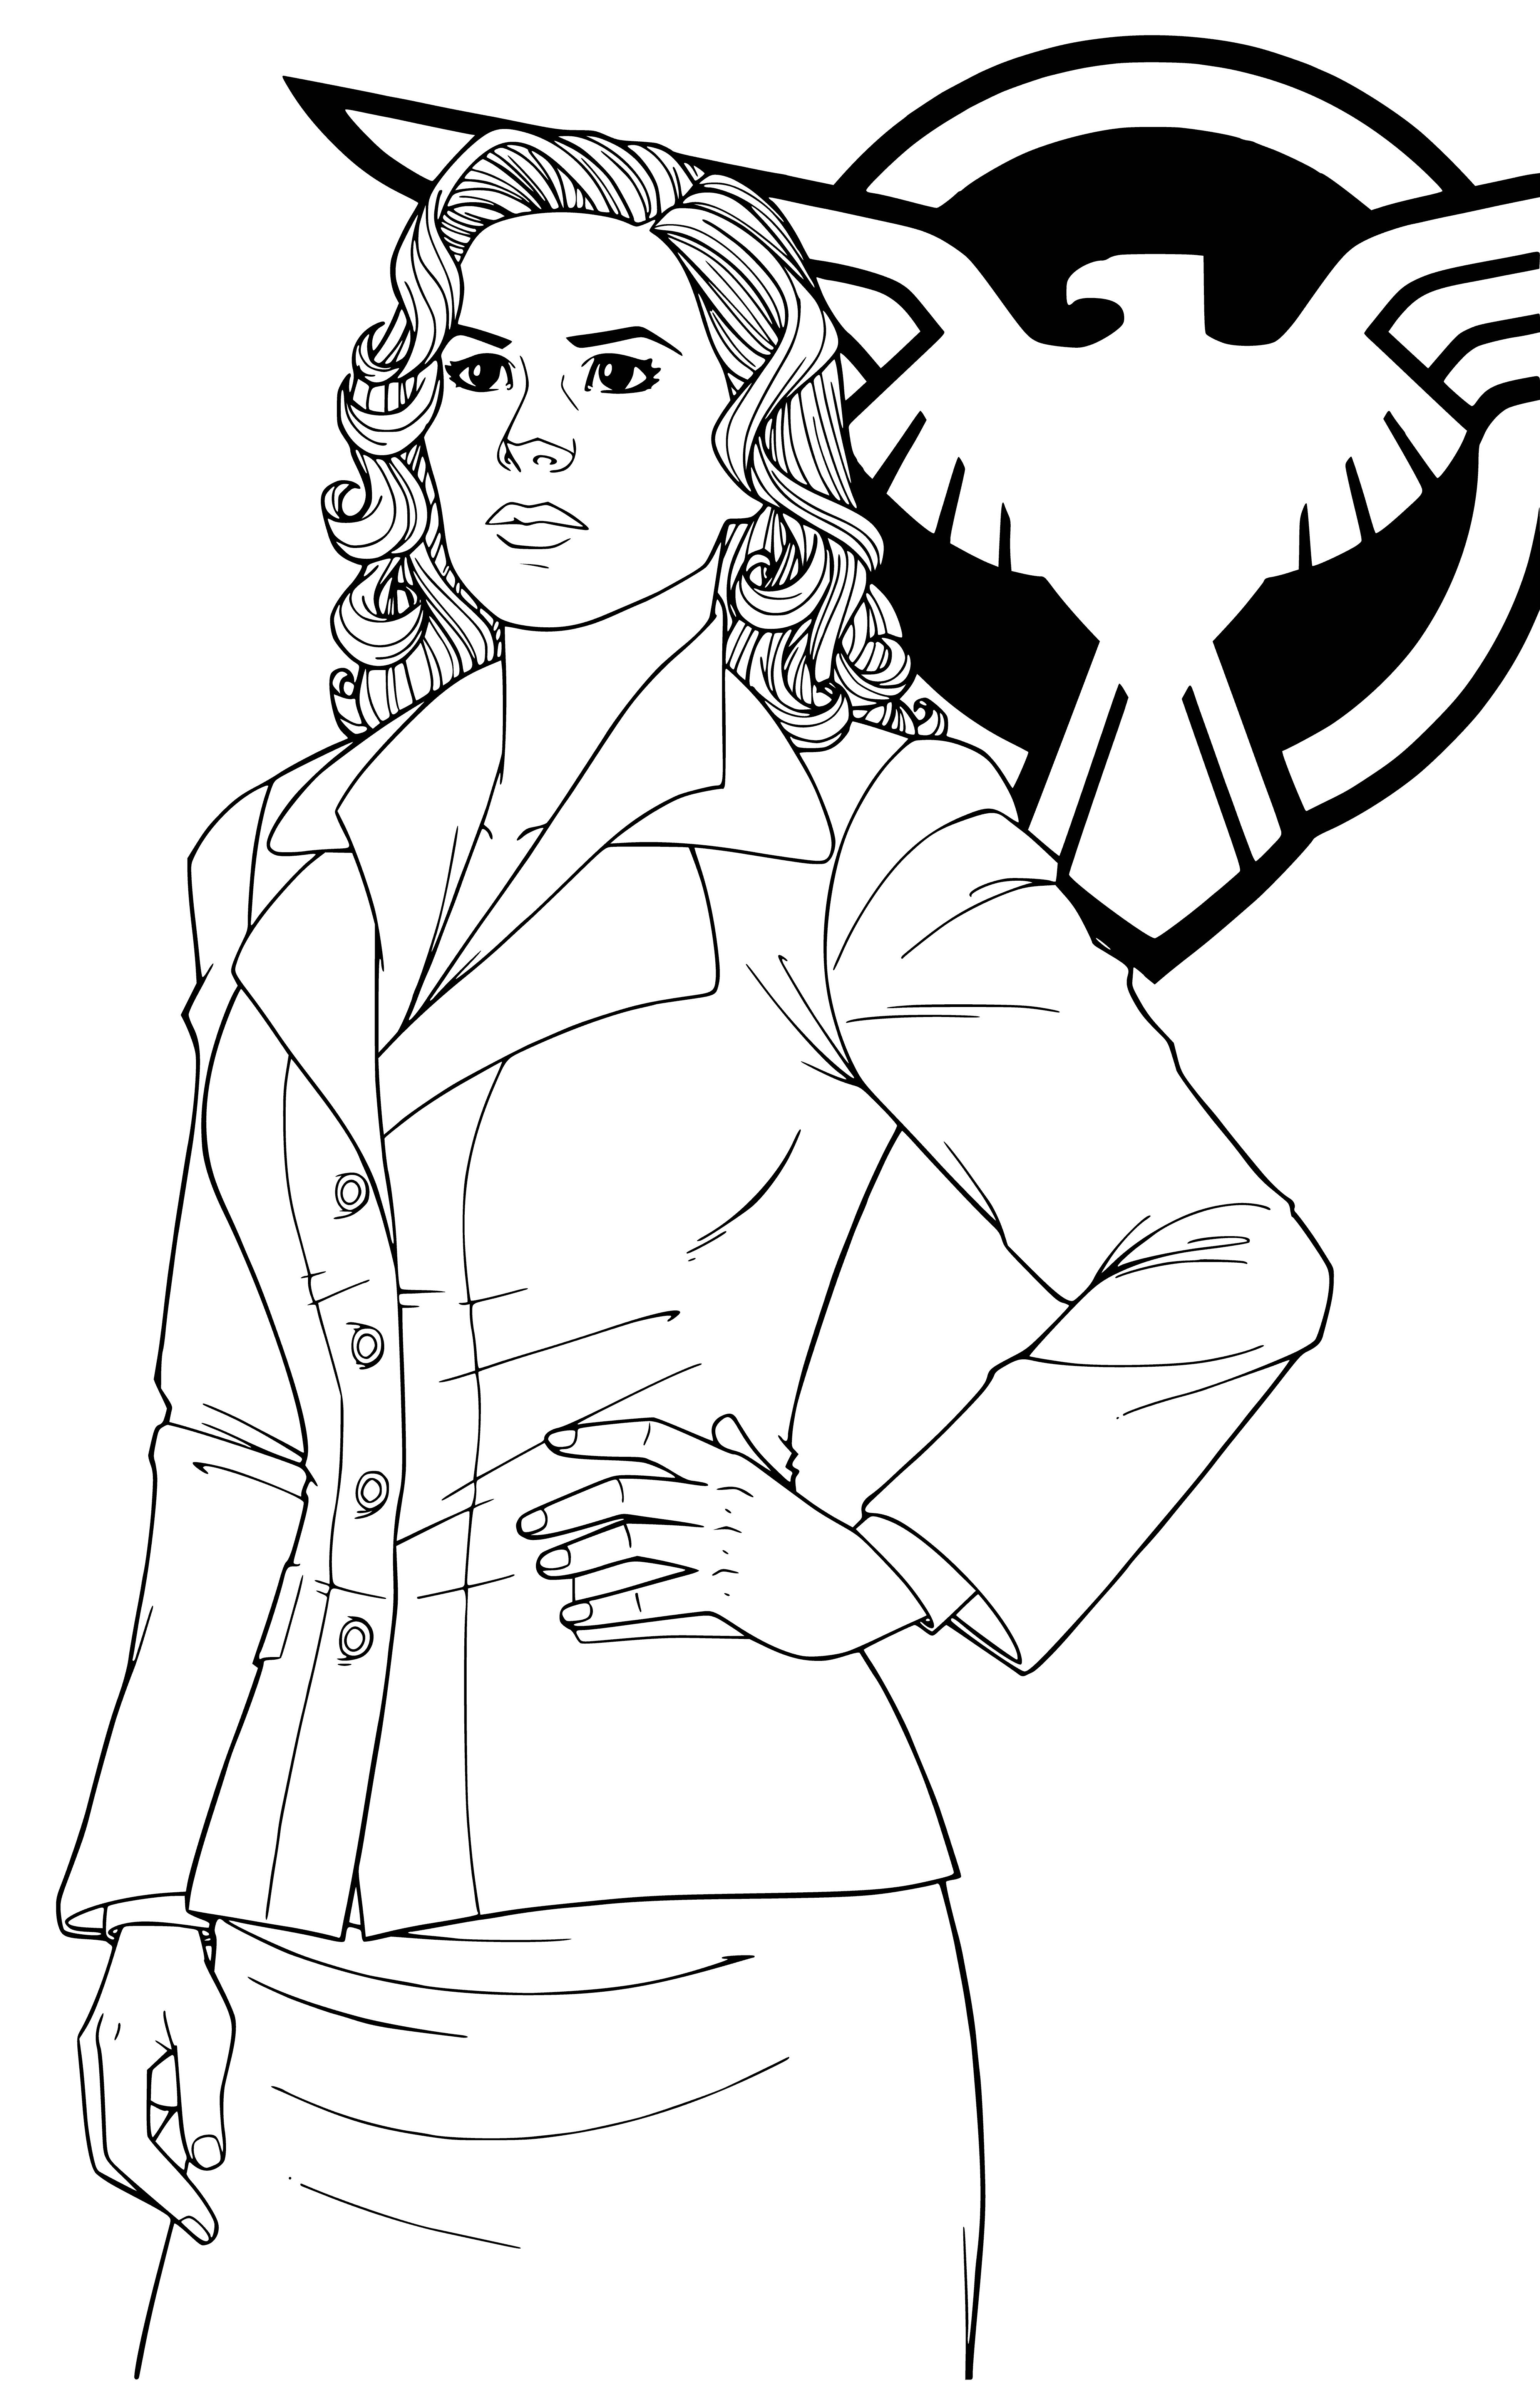 Undercover Agent Peggy Carter coloring page